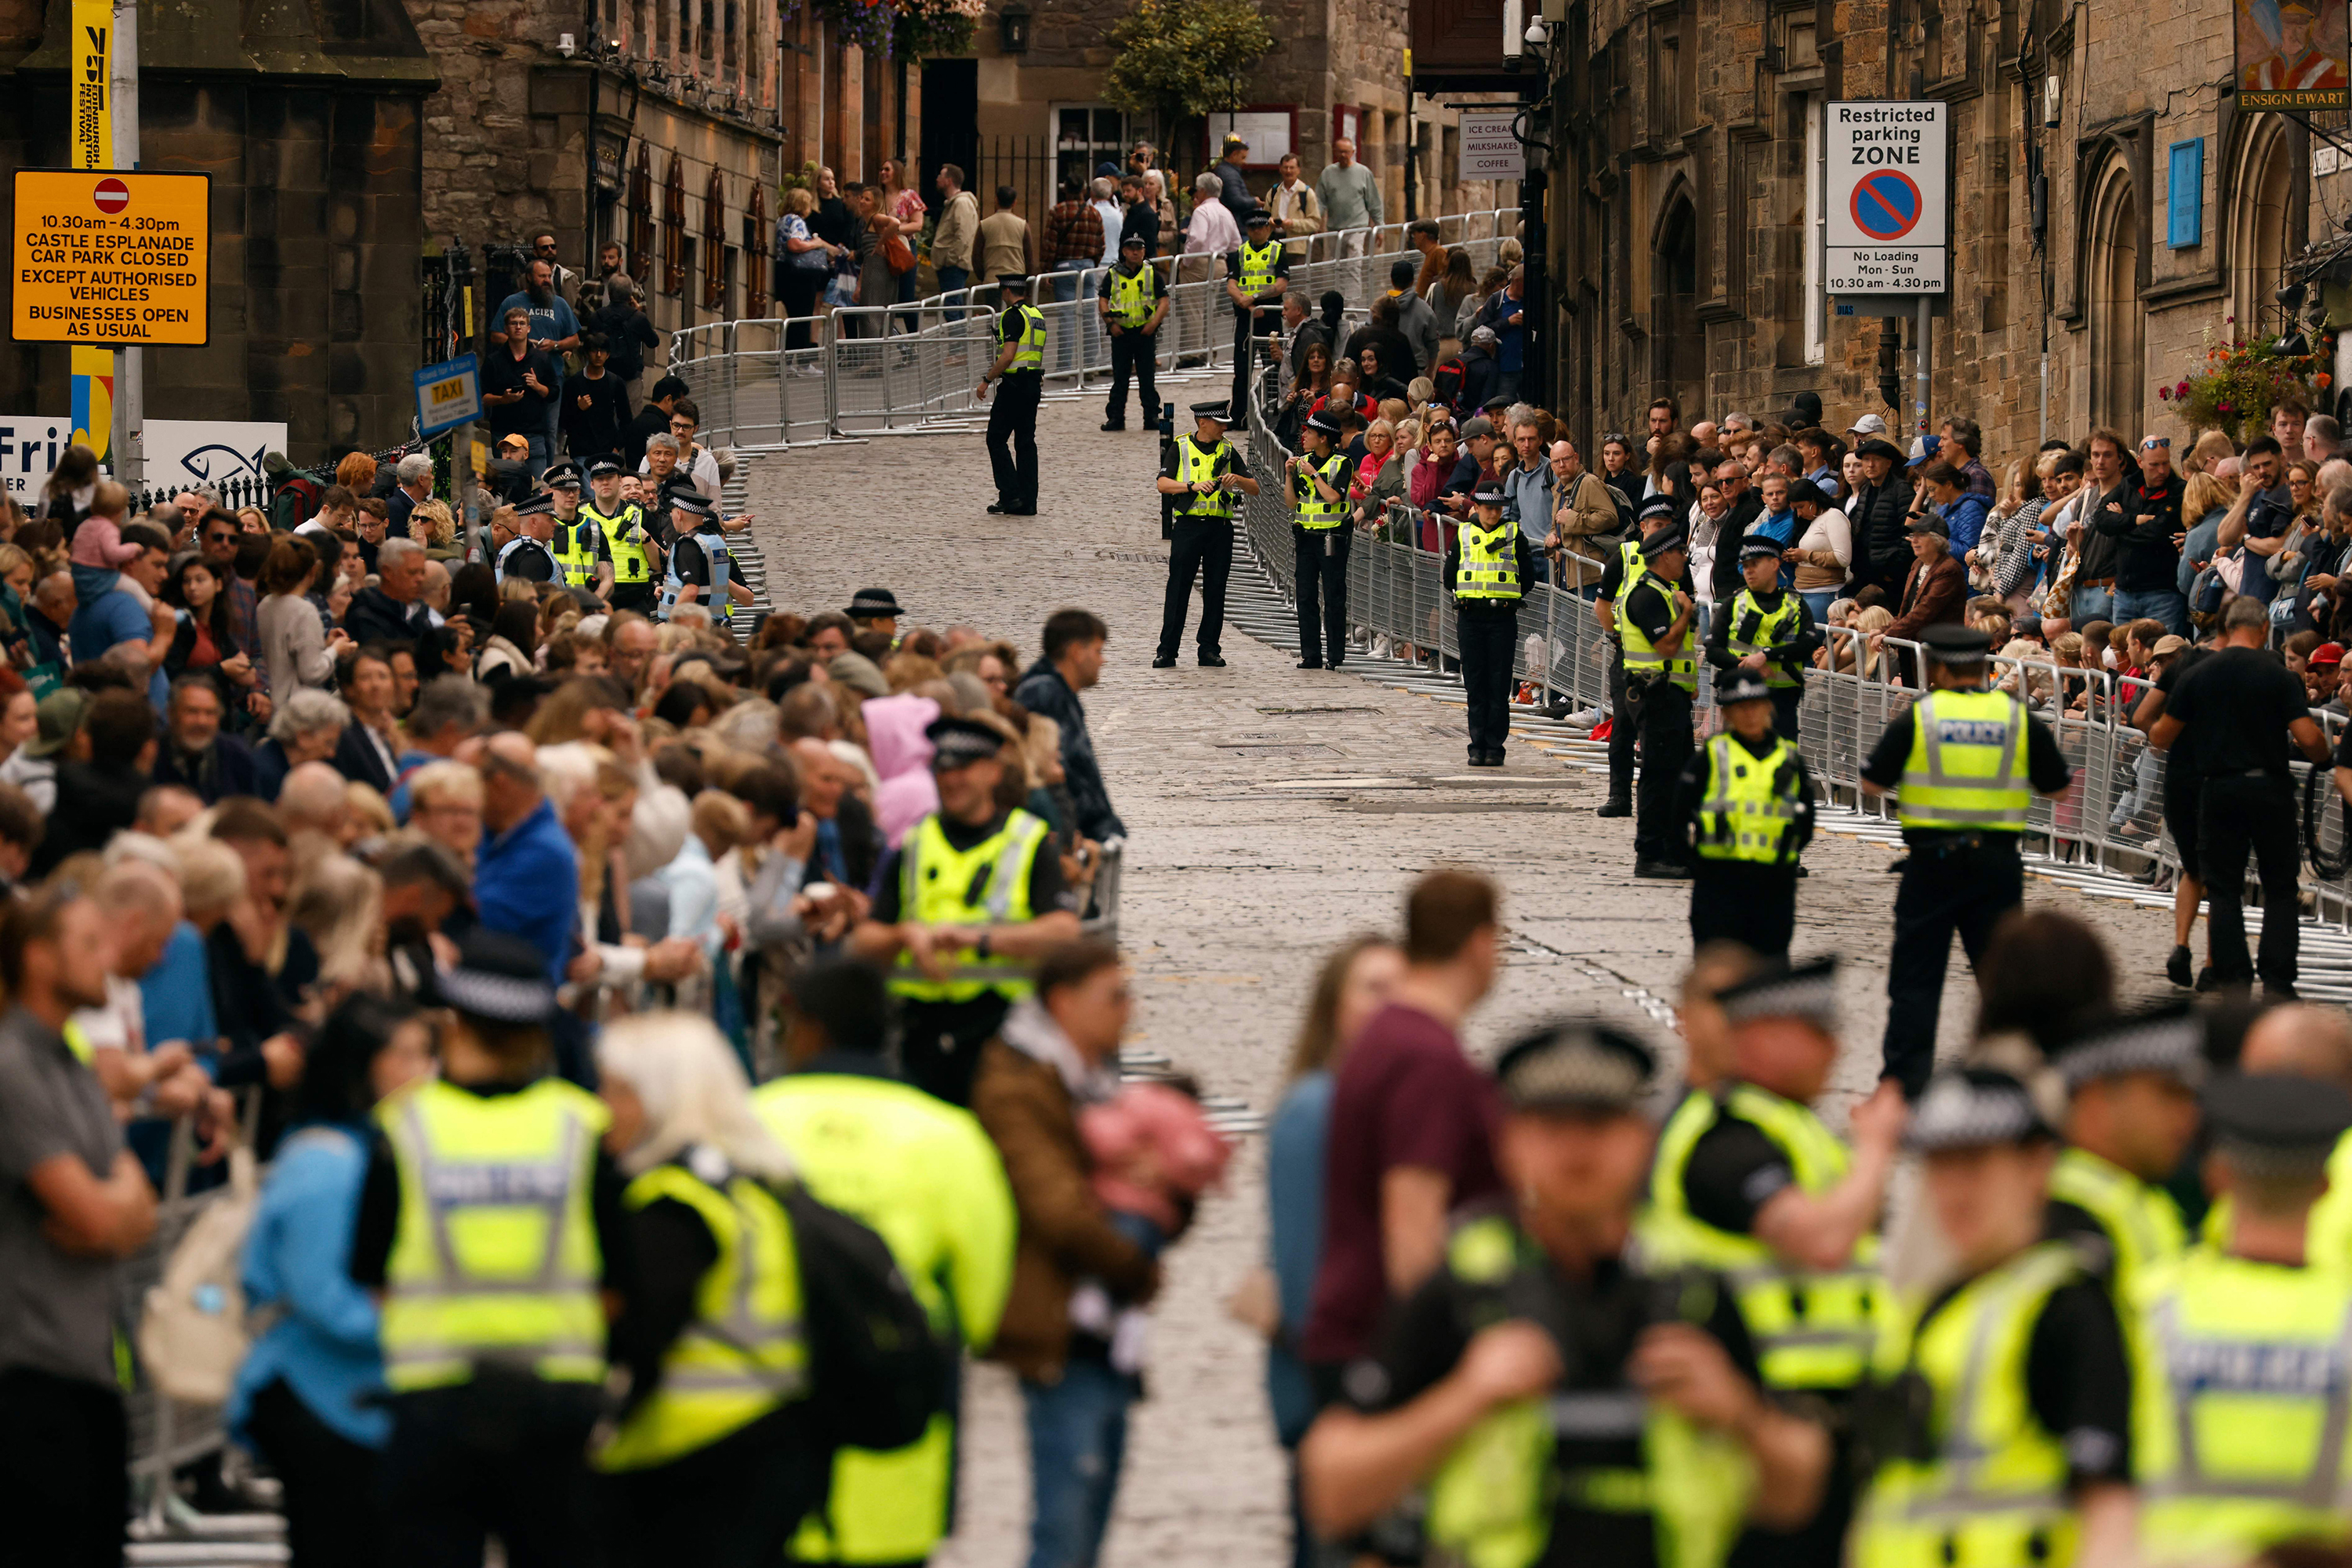 Police officers control the building crowds on Castlehill in Edinburgh on September 11, as preparations are made for the arrival of the coffin of Queen Elizabeth II. 